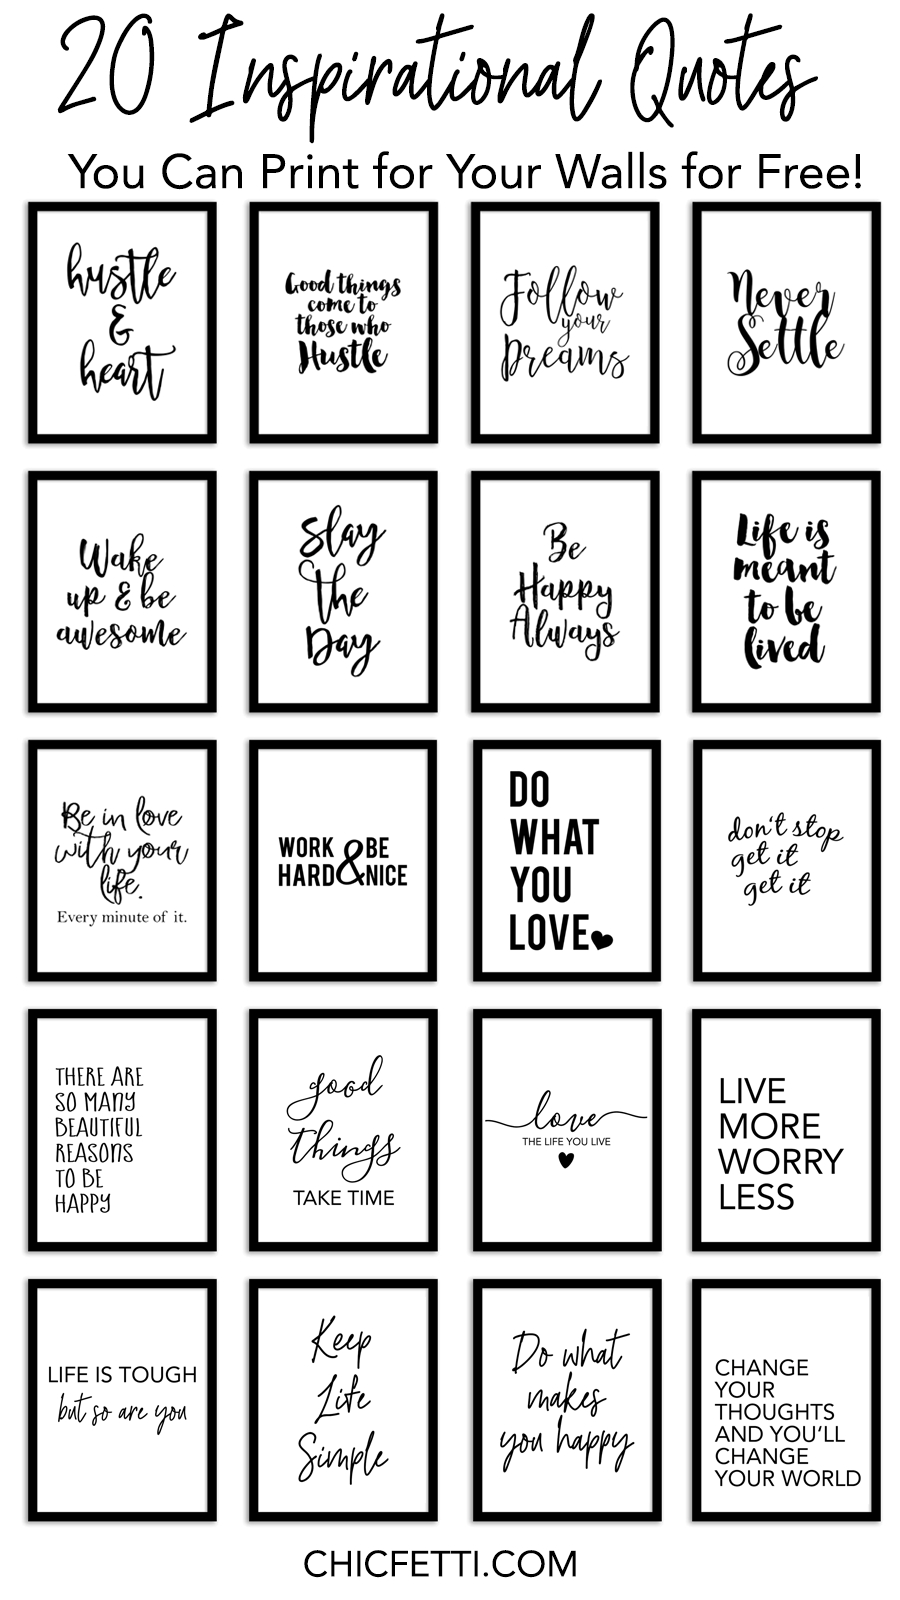 20 Inspirational Quotes You Can Print For Your Walls For Free - Free Printable Quotes And Sayings